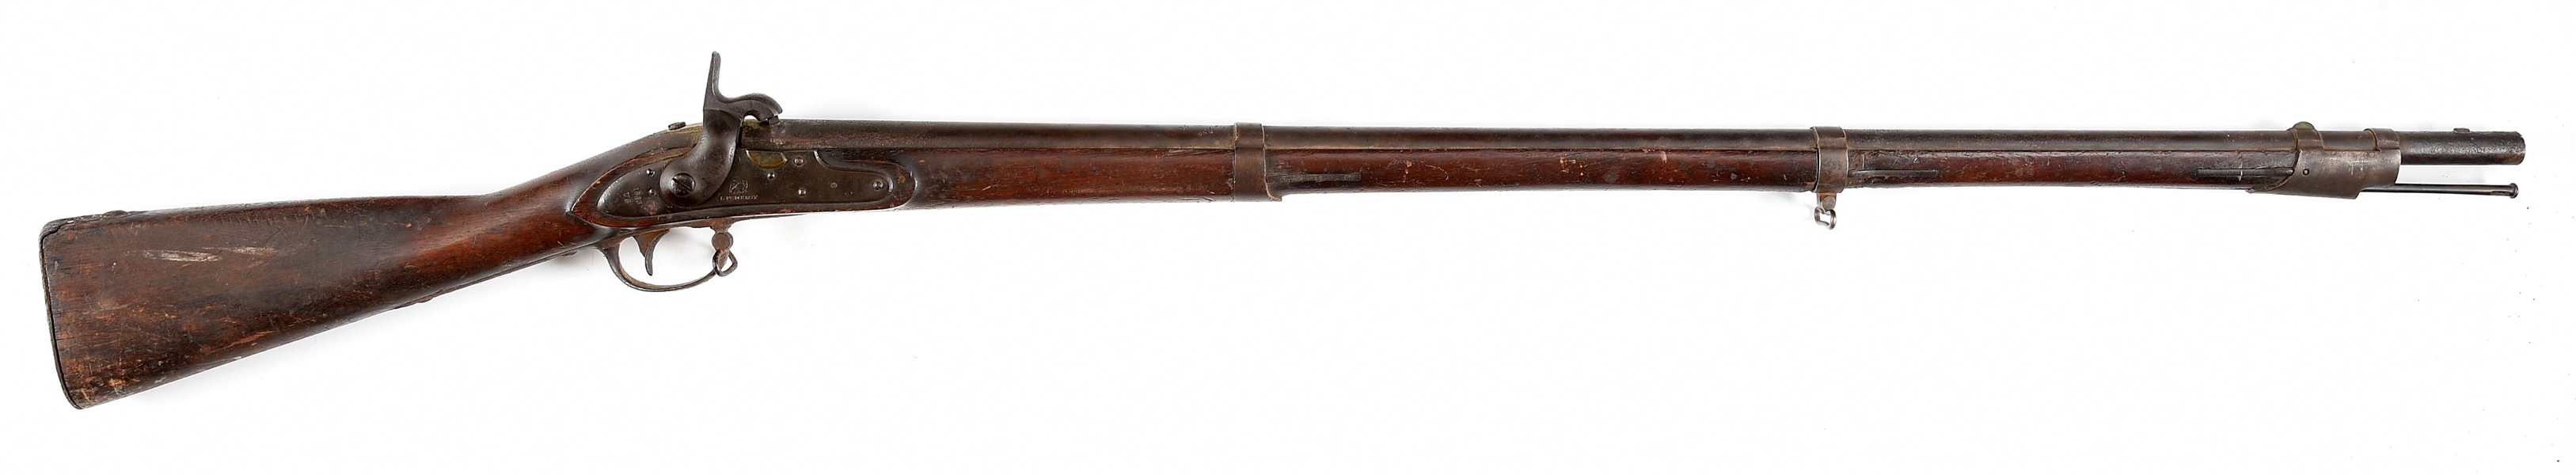 (A) CONVERTED POMEROY M1816 PERCUSSION MUSKET.